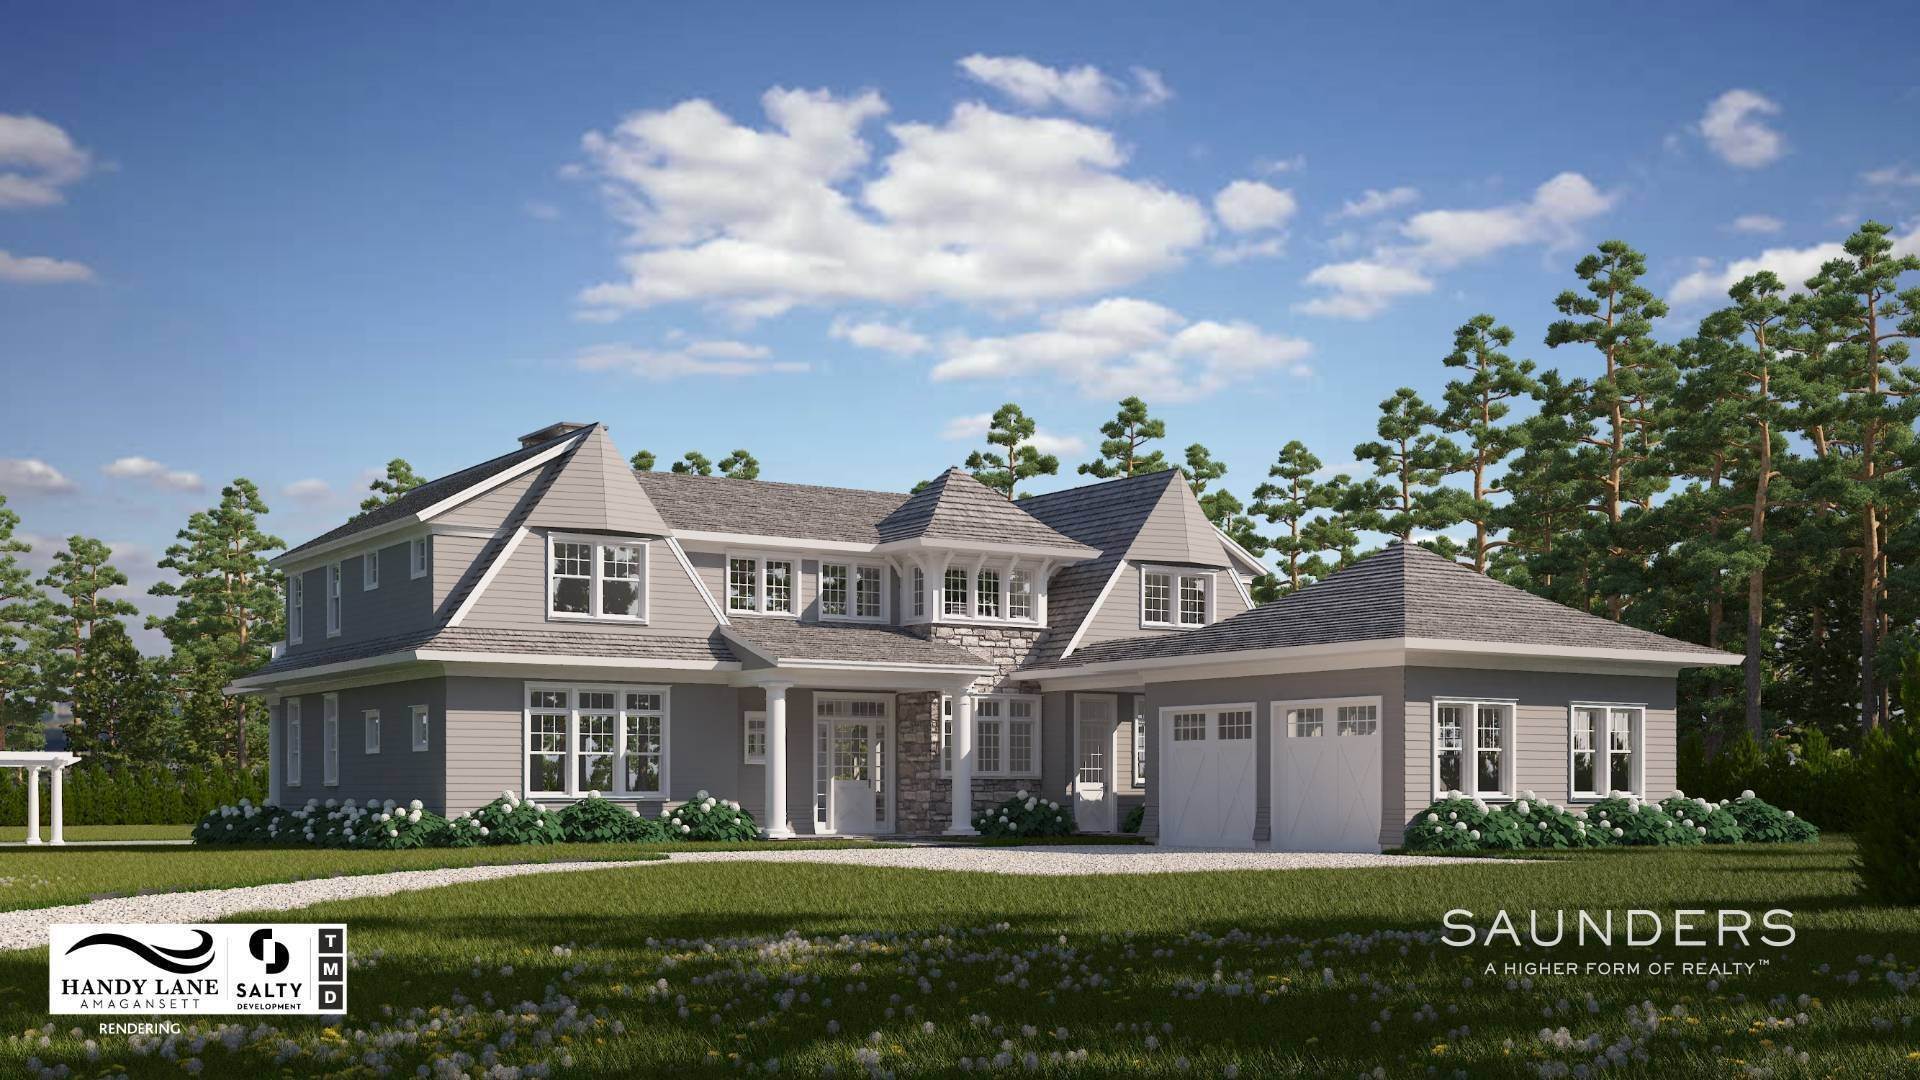 Single Family Homes for Sale at Amagansett South Of The Highway- New Construction 39 Handy Lane, Amagansett, NY 11937